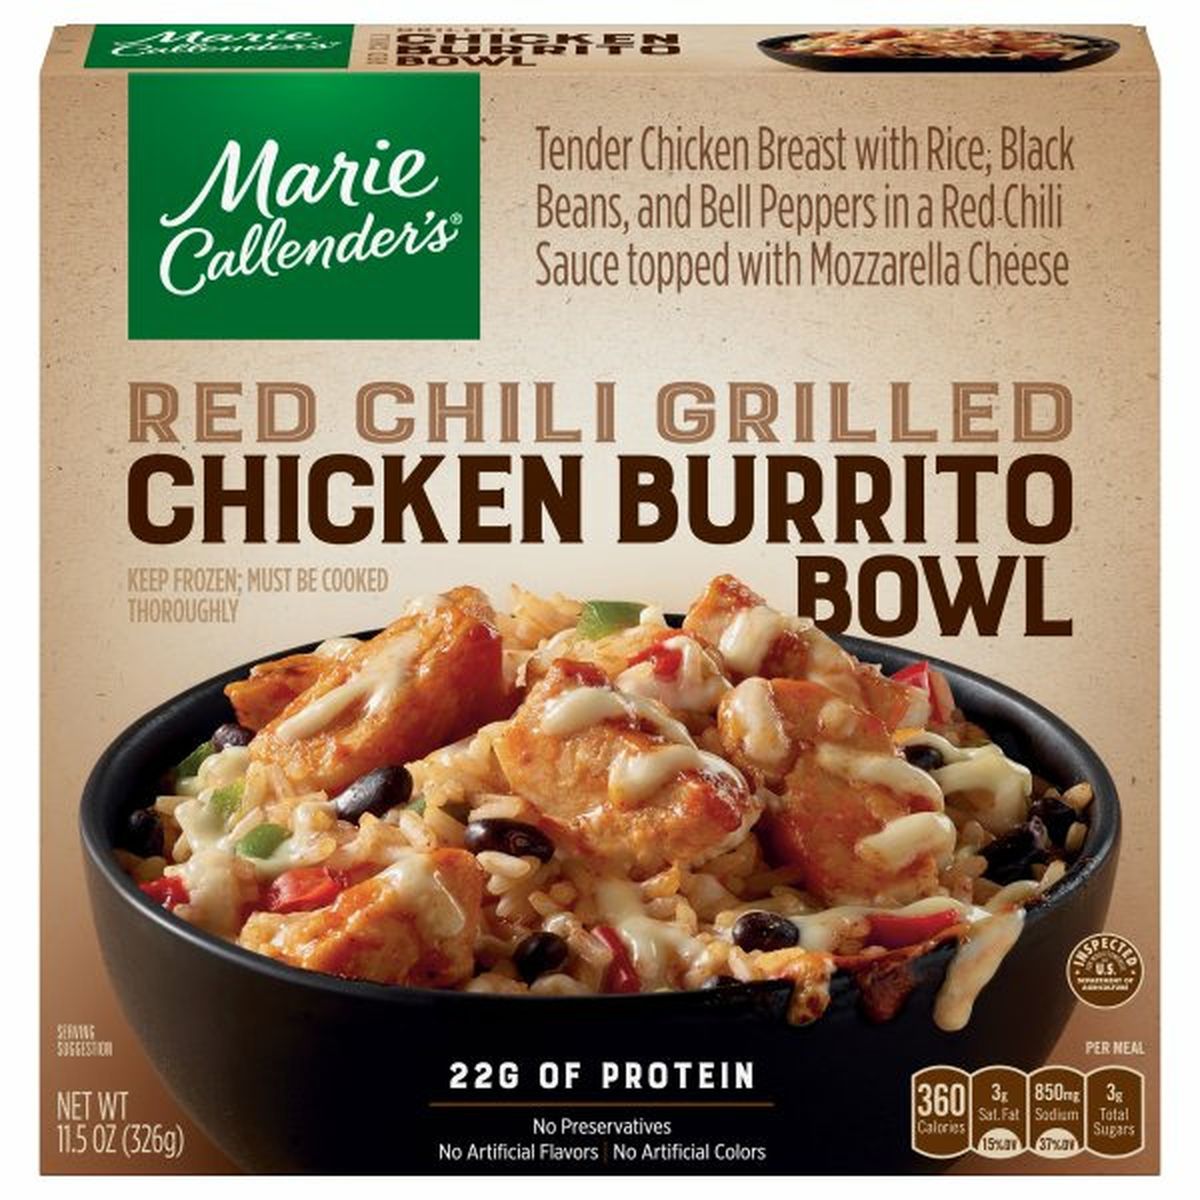 Calories in Marie Callender's Chicken Burrito Bowl, Red Chili Grilled